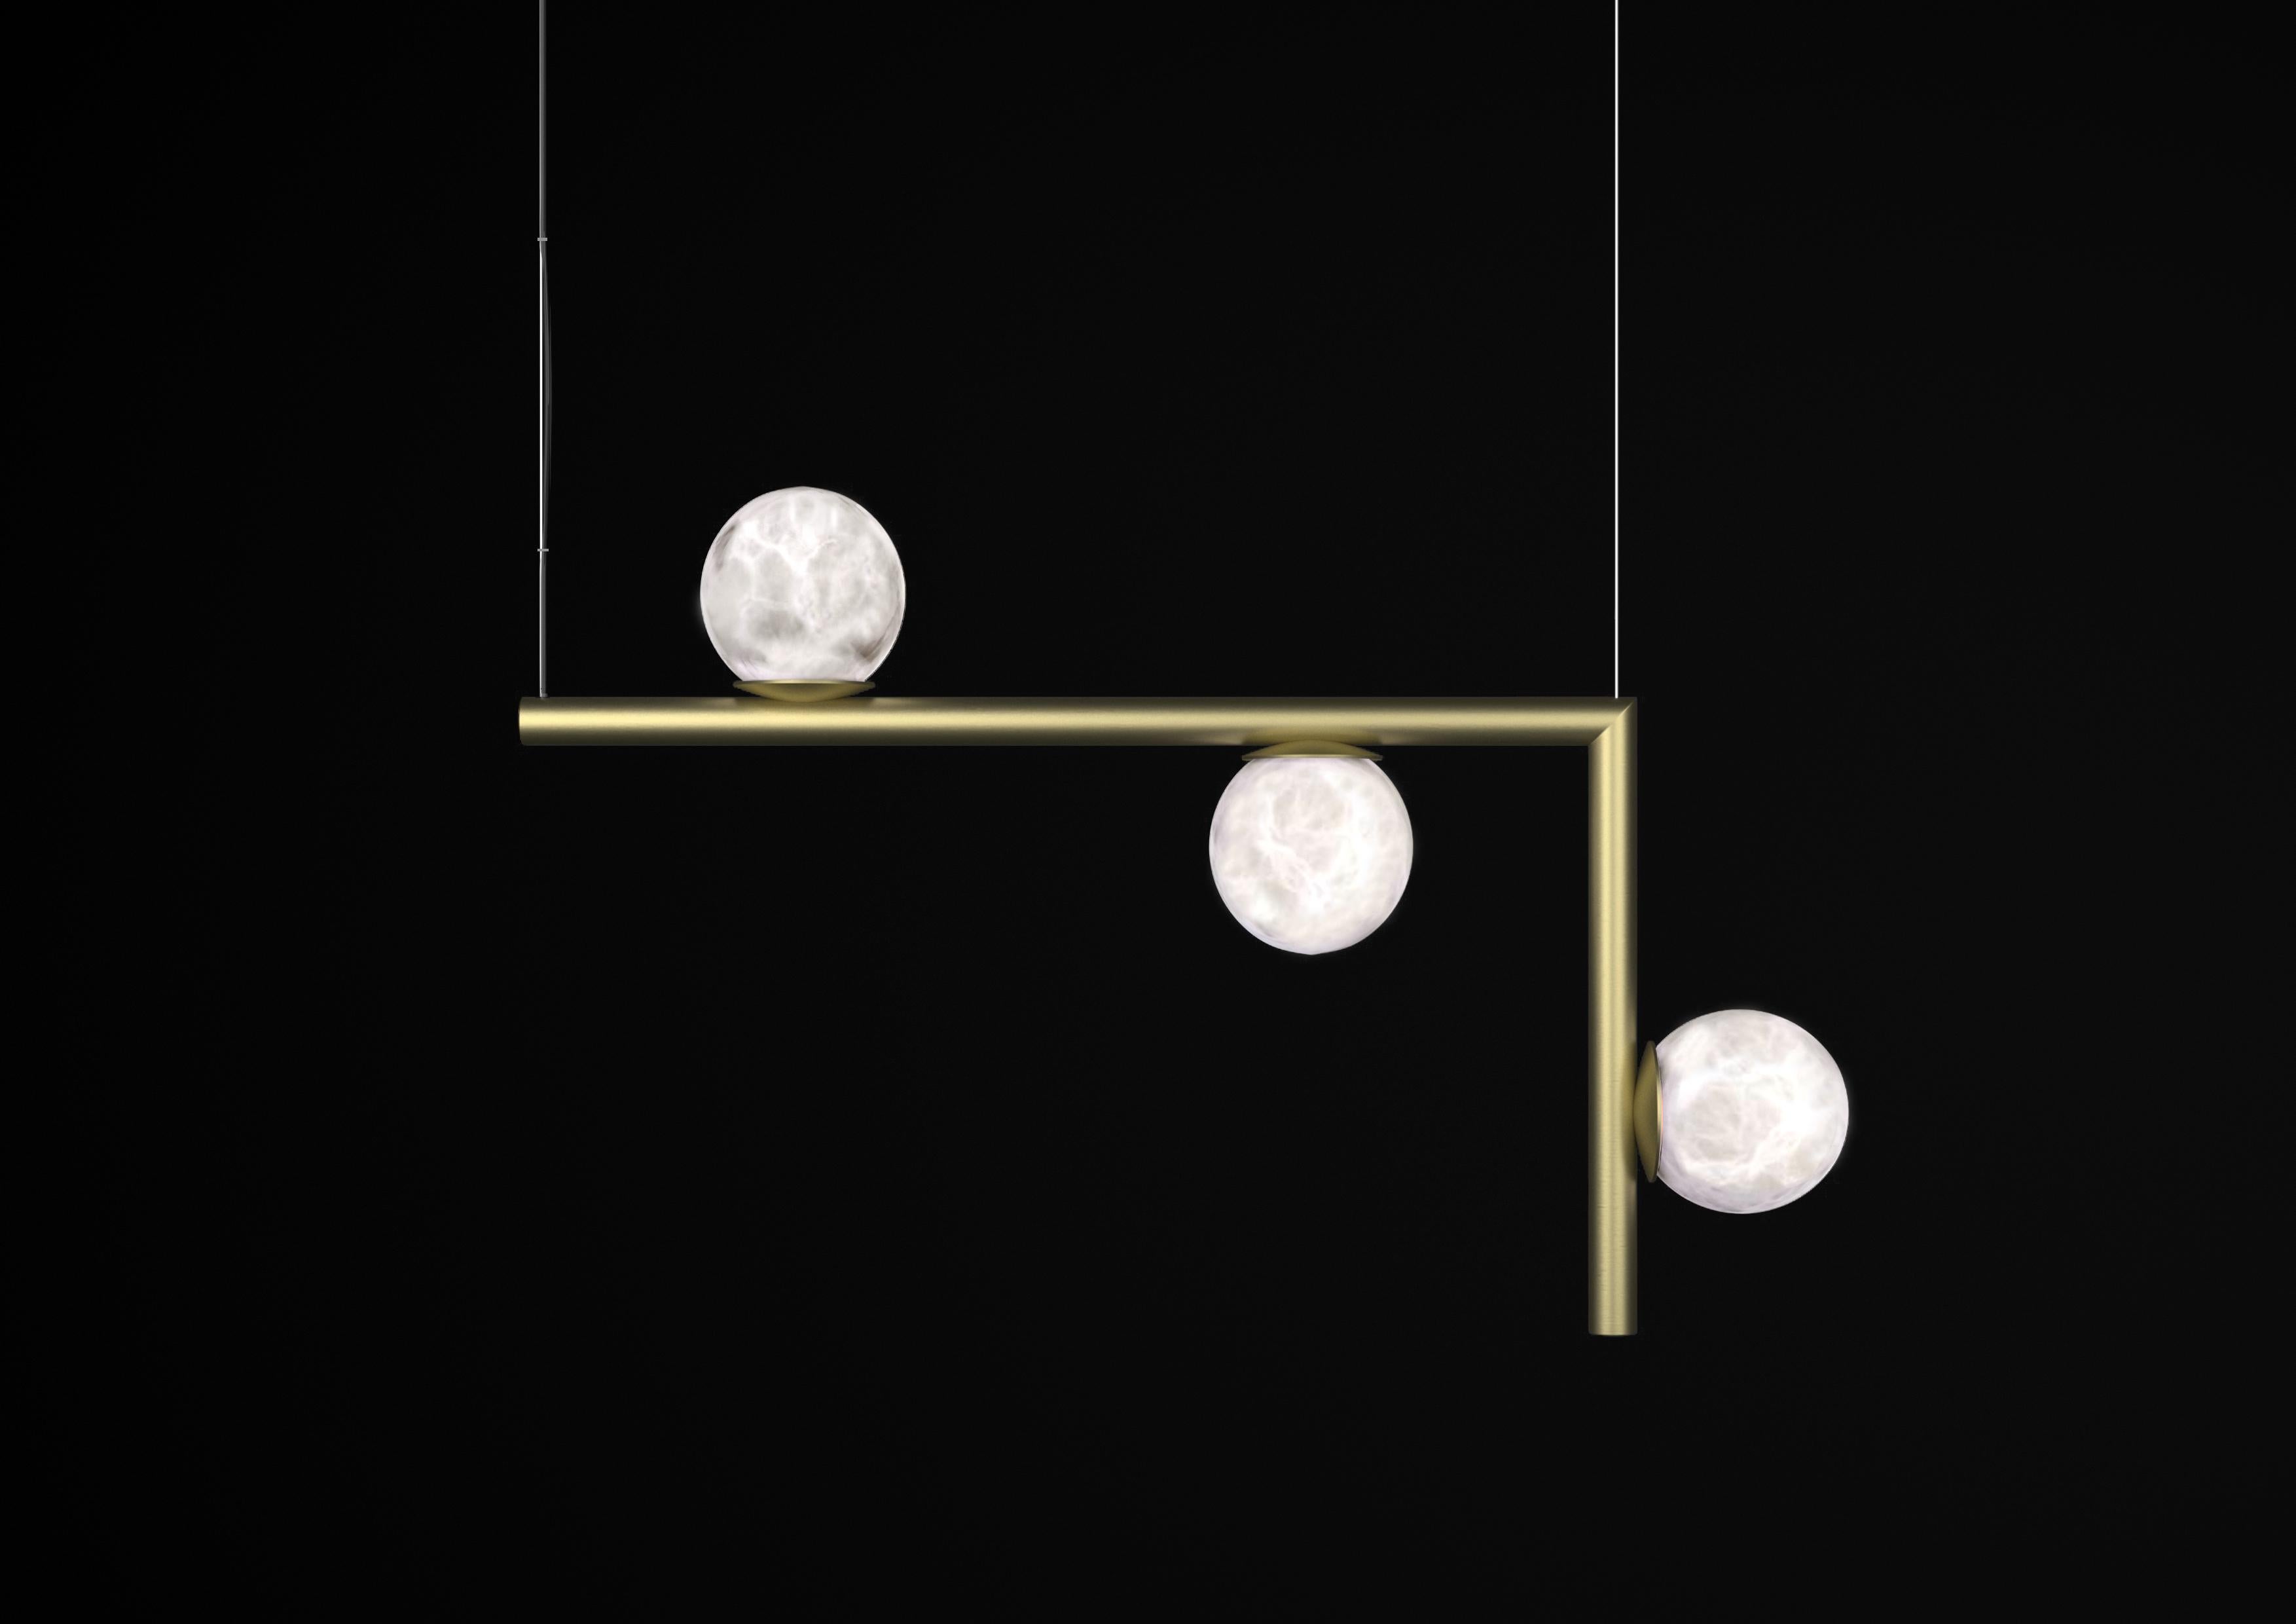 Ofione 2 Brushed Brass Pendant Lamp by Alabastro Italiano
Dimensions: D 14 x W 85 x H 55 cm.
Materials: White alabaster and brass.

Available in different finishes: Shiny Silver, Bronze, Brushed Brass, Ruggine of Florence, Brushed Burnished, Shiny